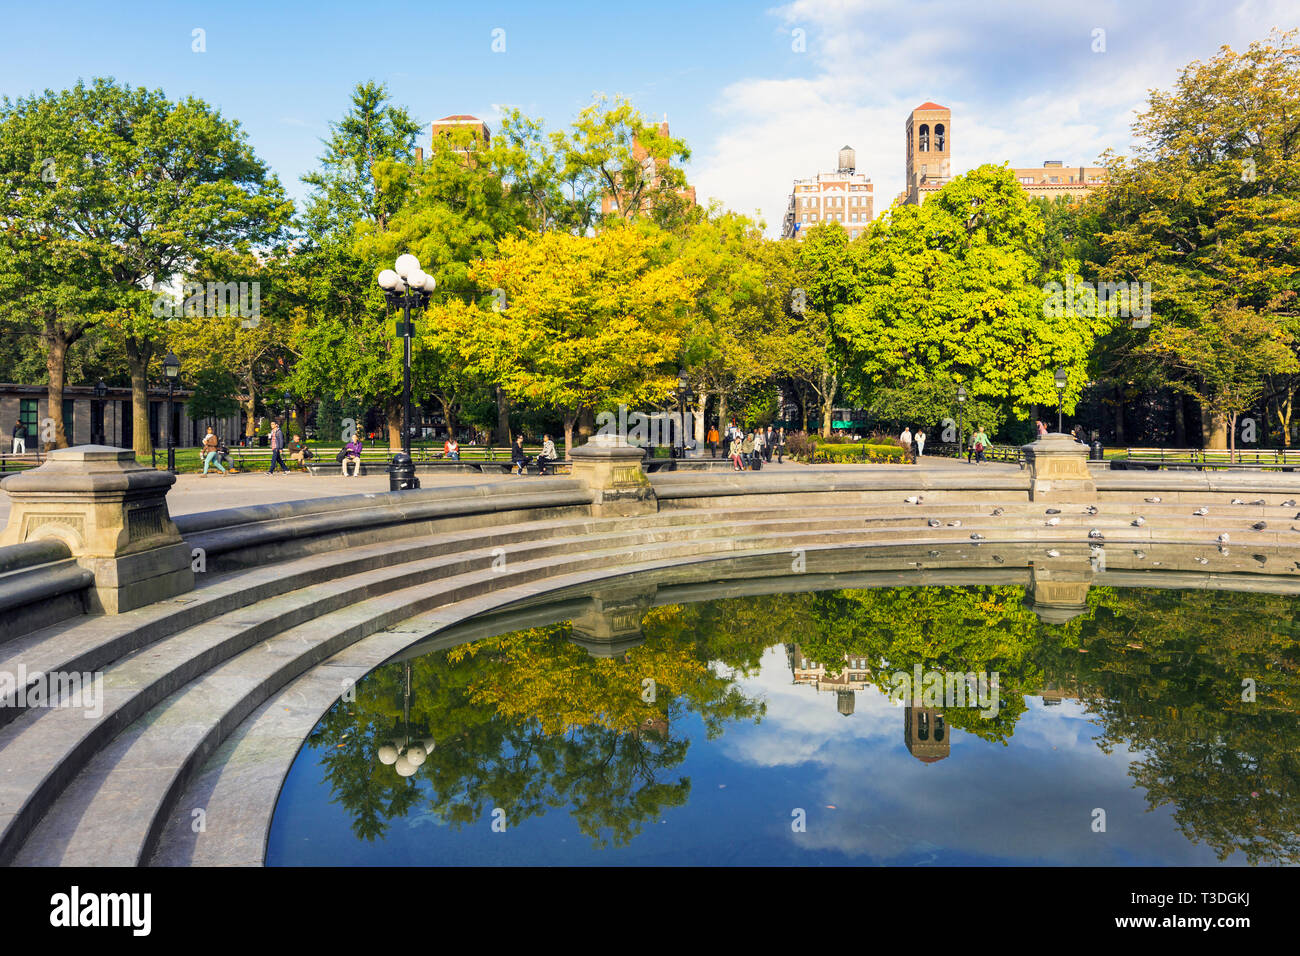 The central fountain pond in Washington Square Park, New York City, New York State, USA. Stock Photo